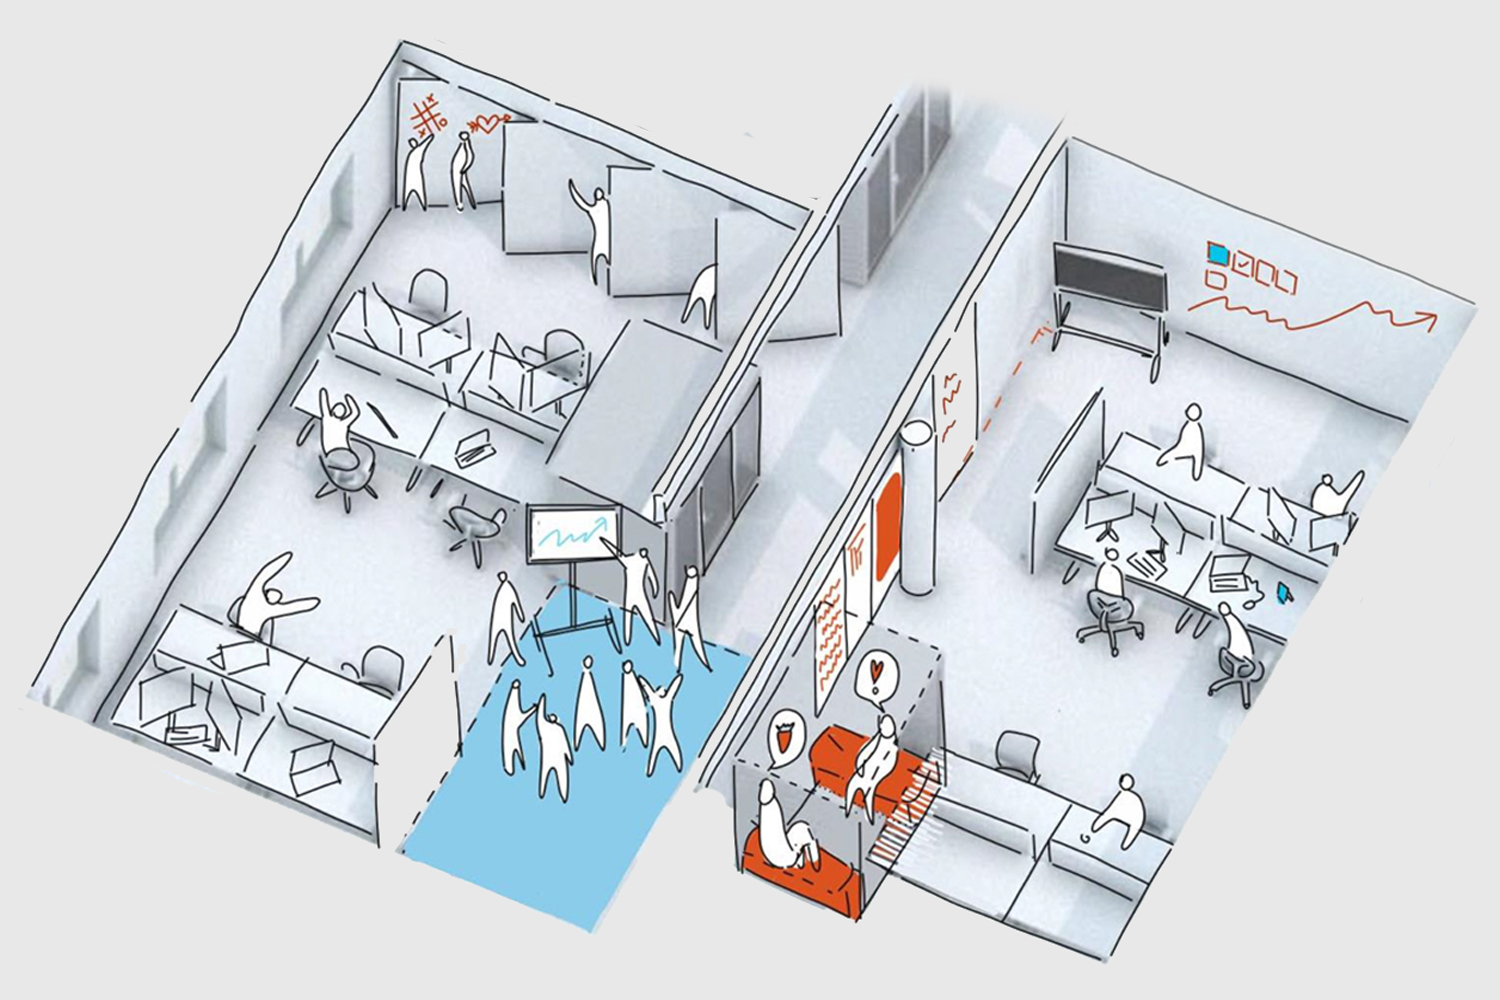 Agile workplace | Space full of options